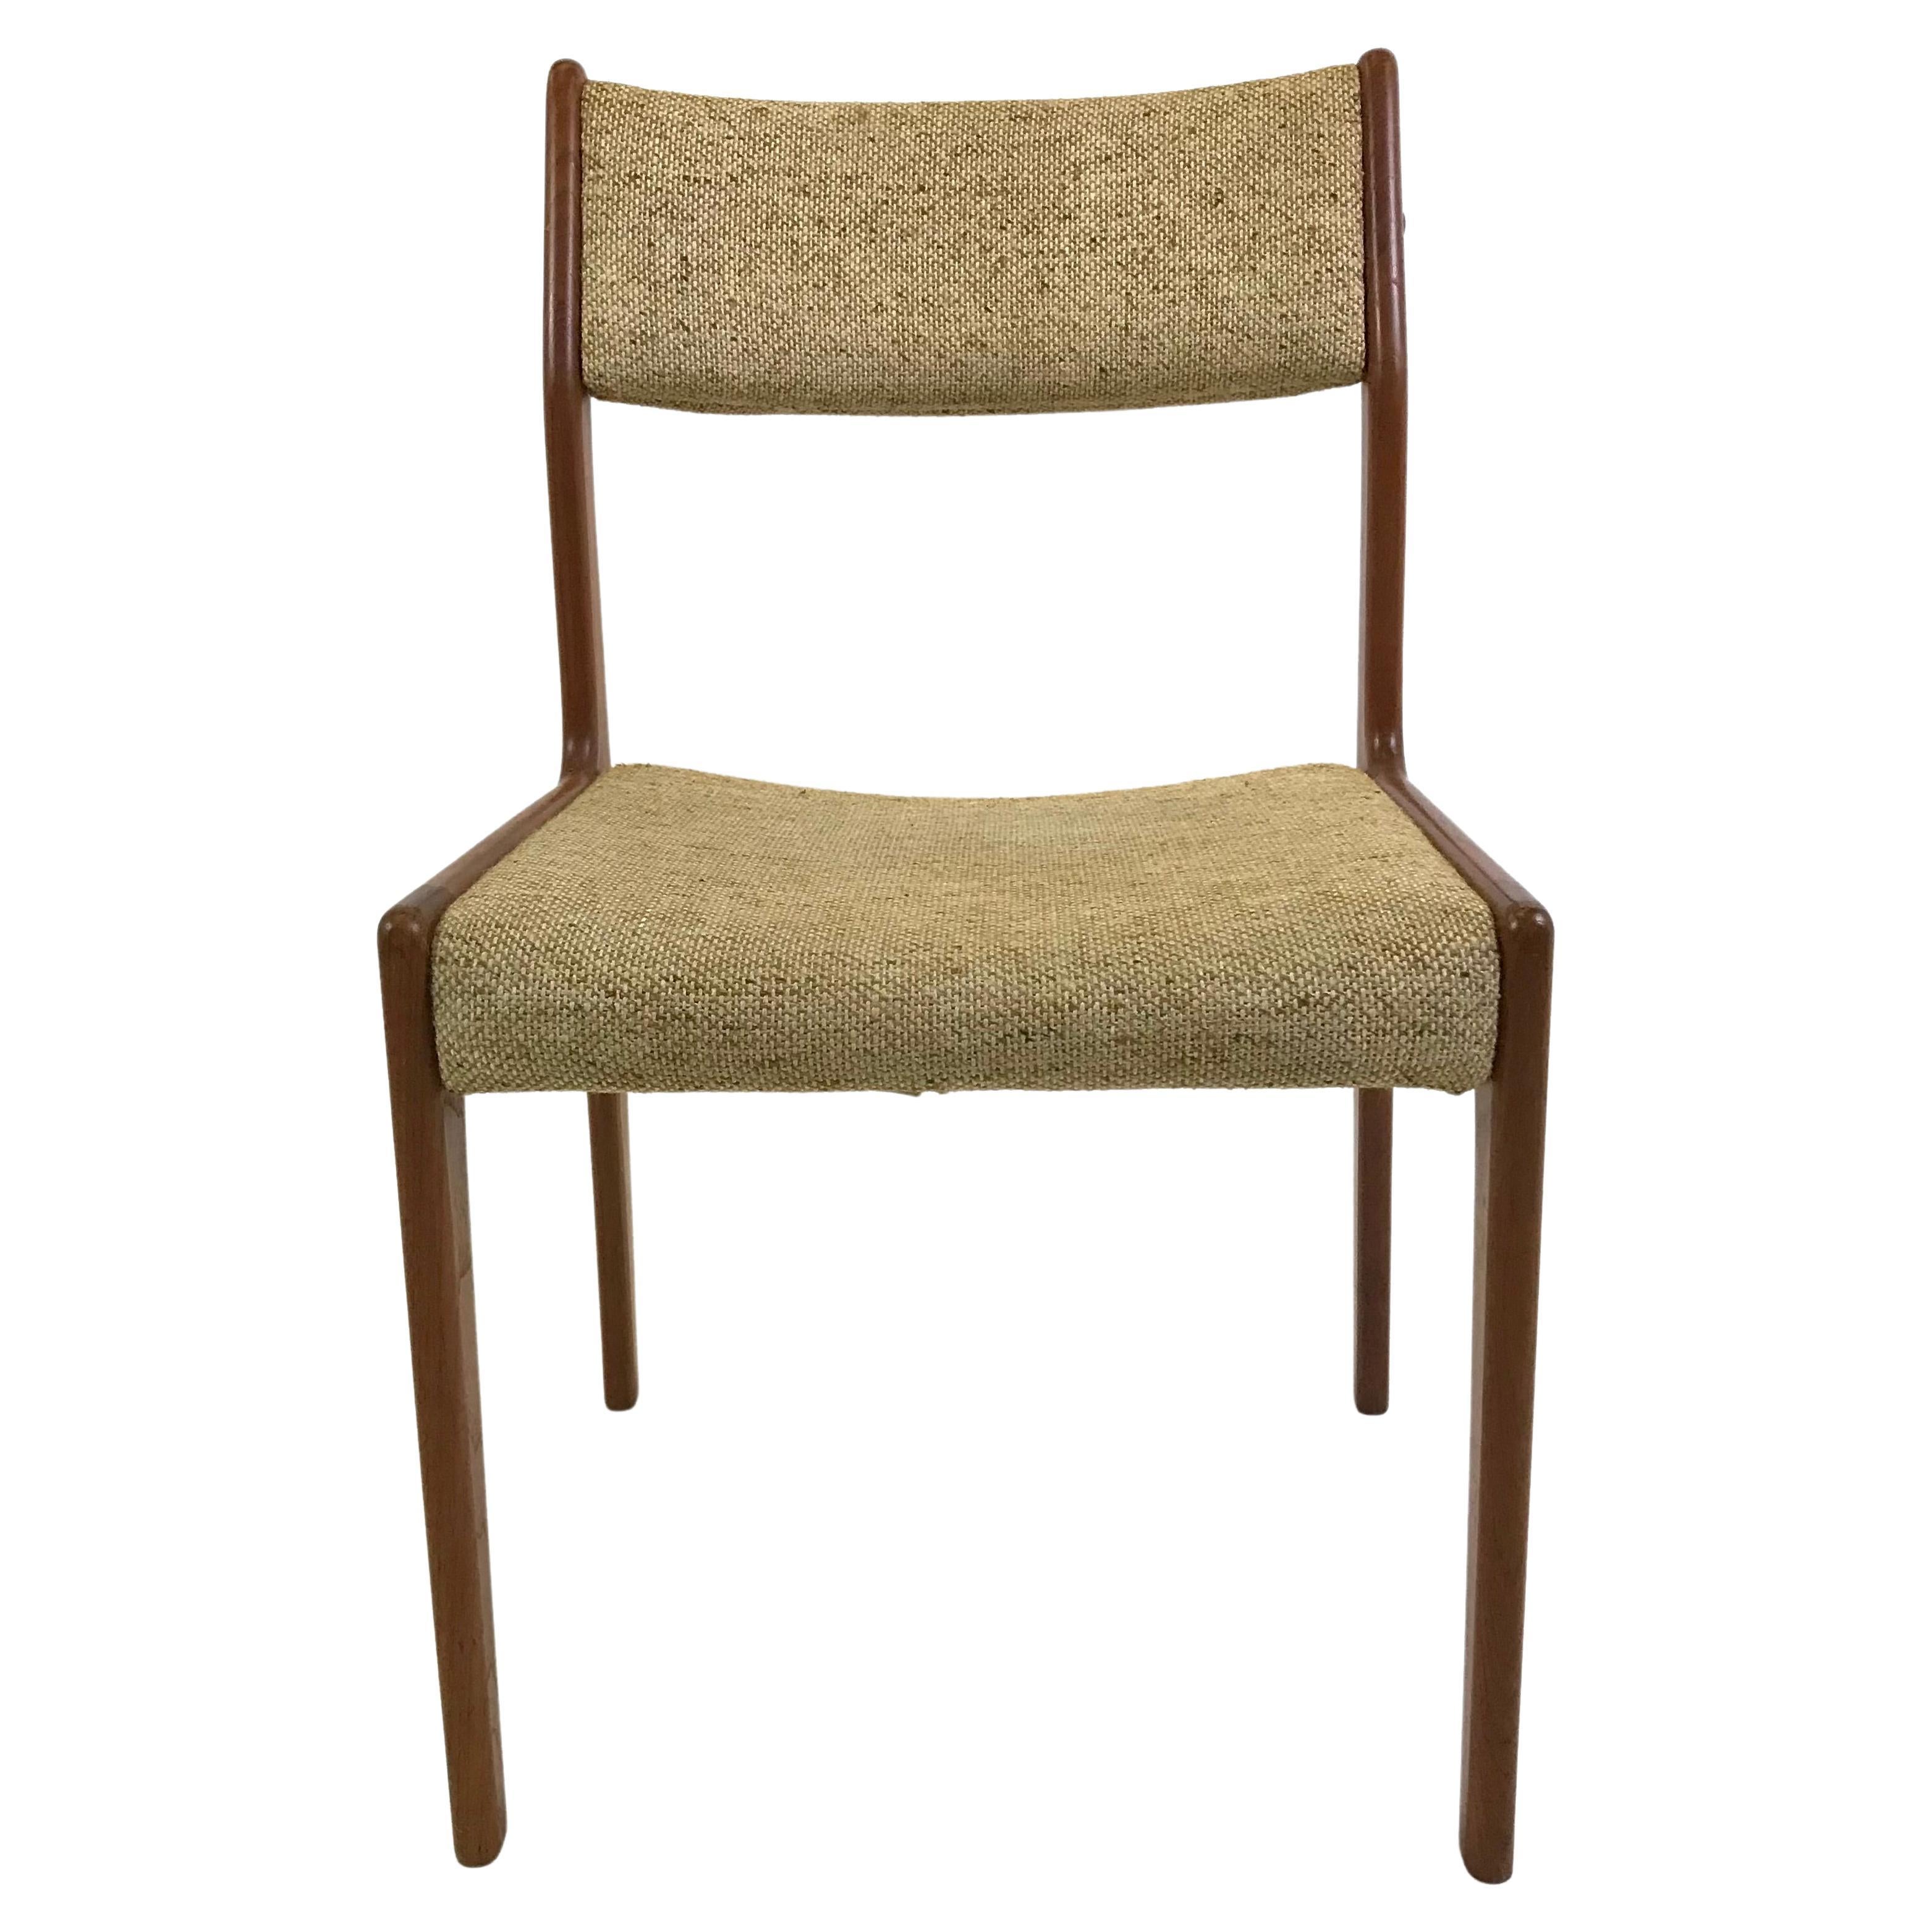 1960s Danish Mid-Century Modern Chair by Farso Stolefabrik in teak wood and woven oatmeal wool fabric, all original. In very good condition with minor wear with the exception of the seat's upholstery which show use and light staining but no damage,